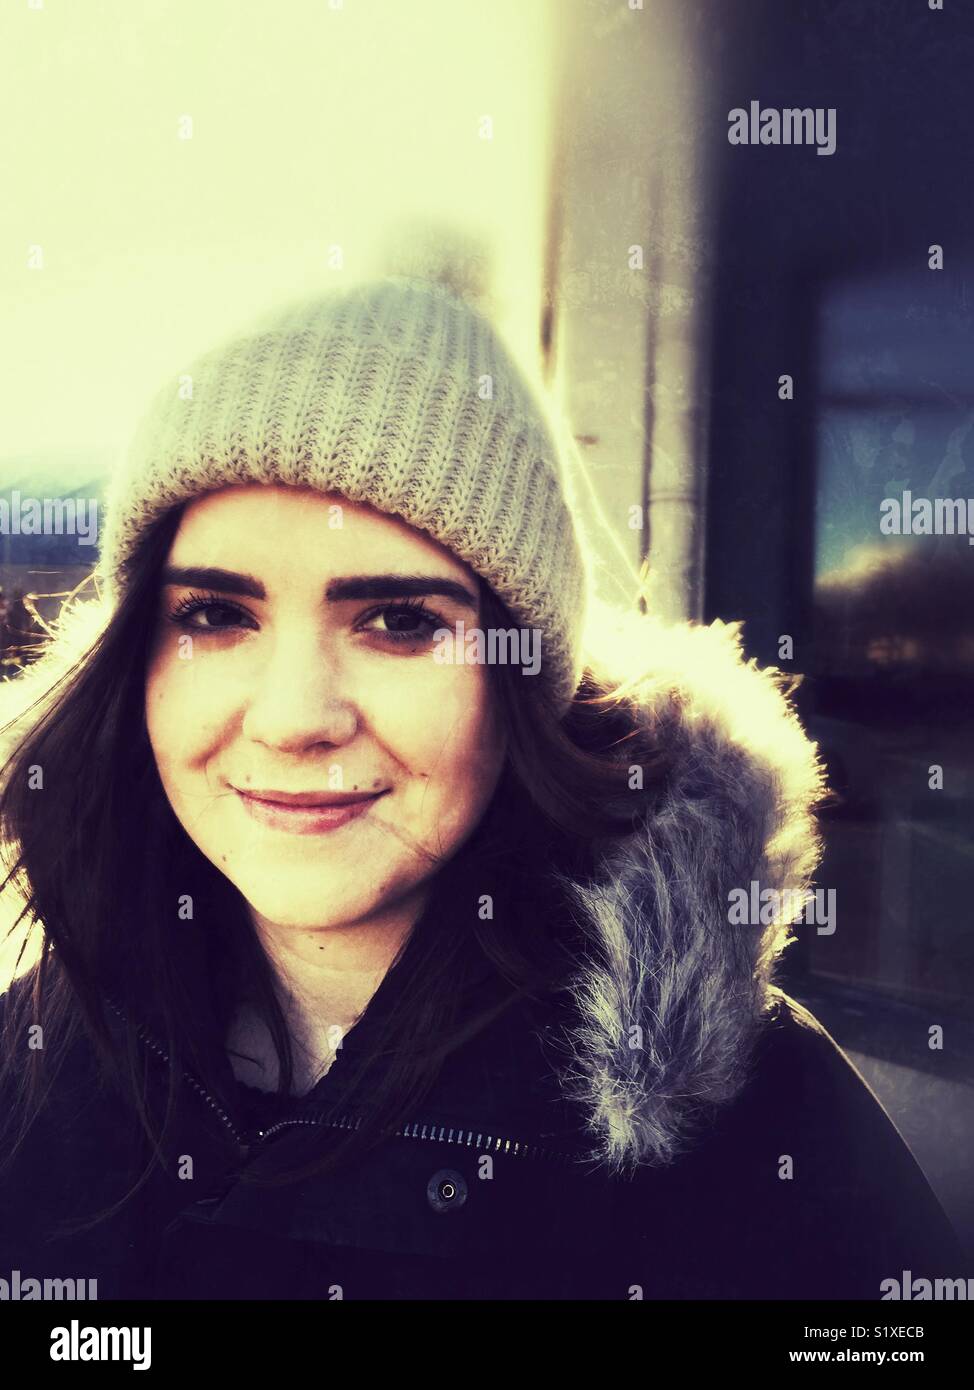 Smiling young woman in wool hat and parka outside. Stock Photo